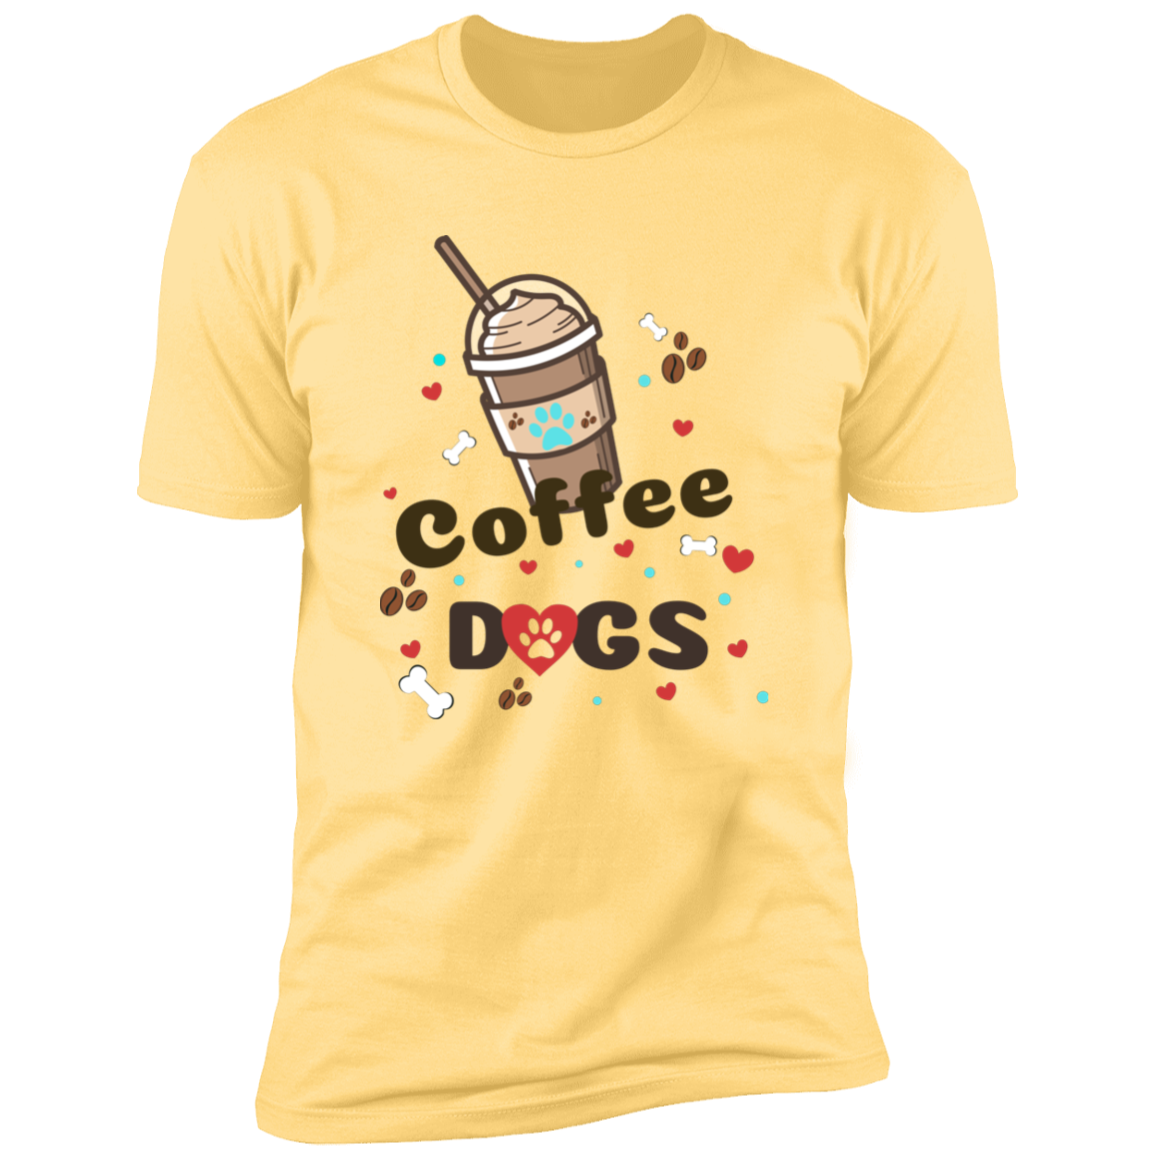 Blended Coffee Dogs T-shirt, Dog Shirt for humans, in banana cream